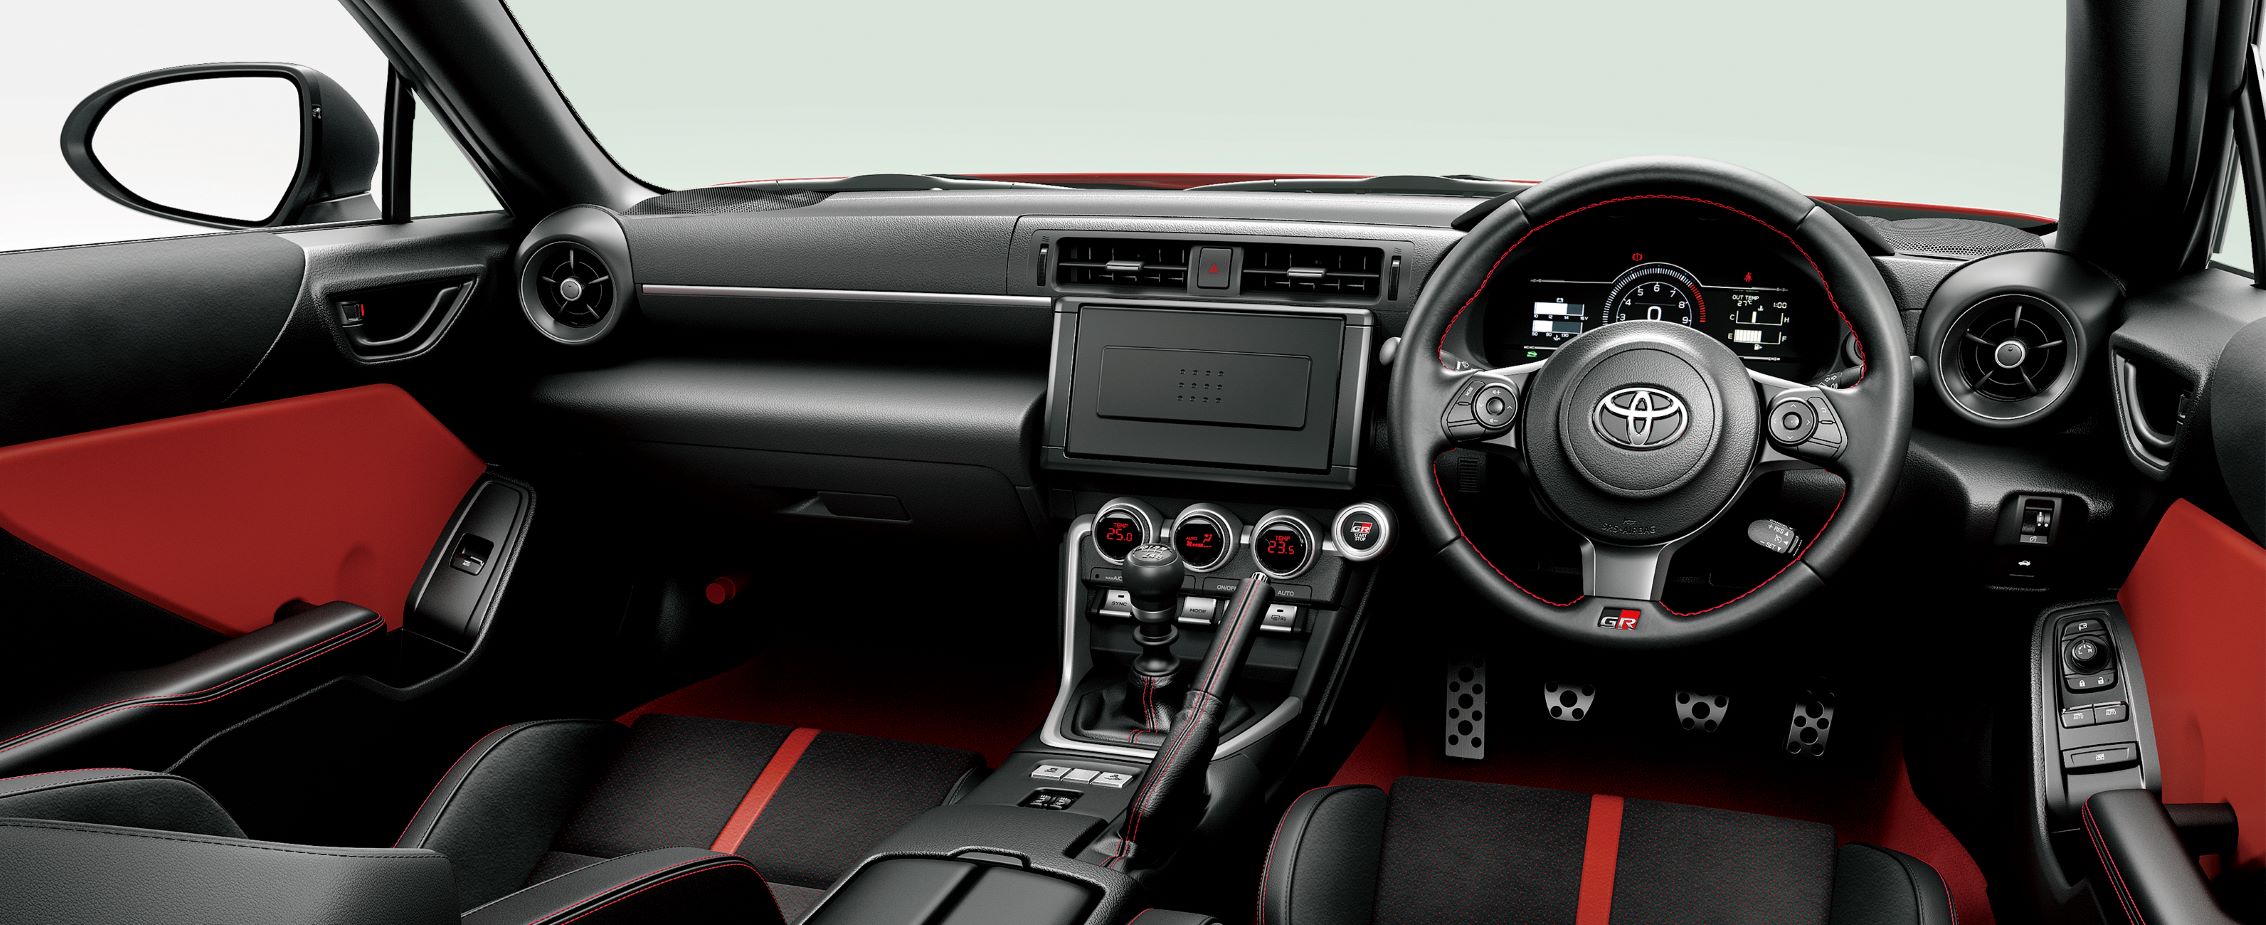 Interior of the Toyota GR86